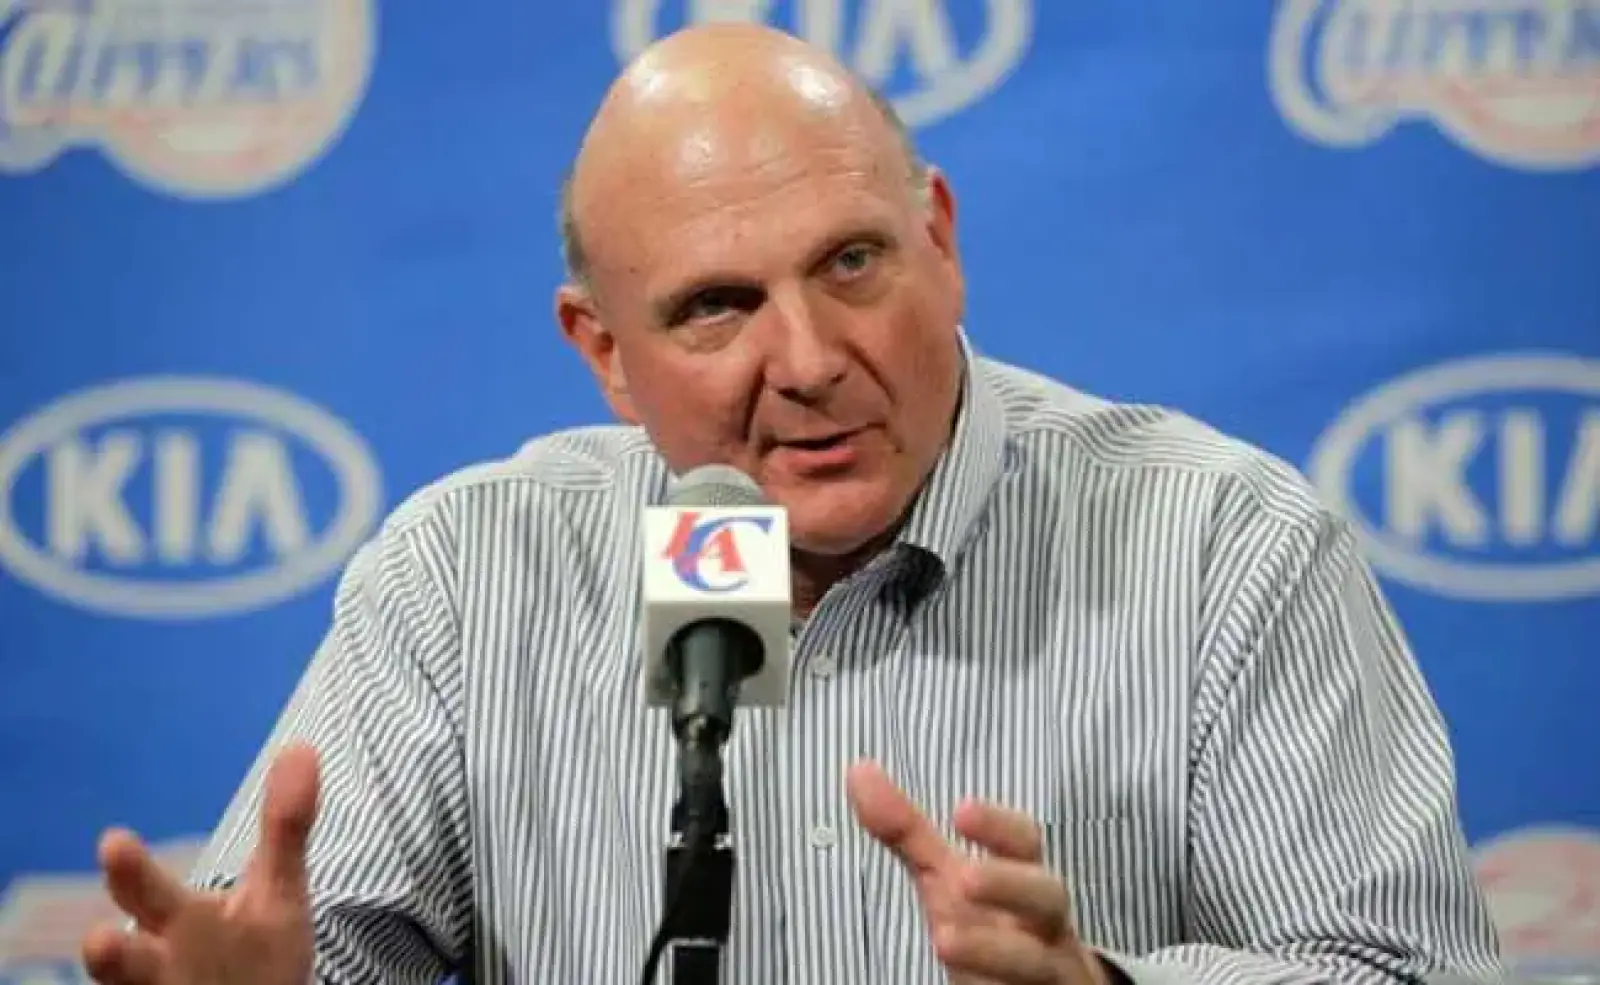 Former CEO Steve Ballmer will get $1 billion from Microsoft without doing anything, know why the company was so kind to him